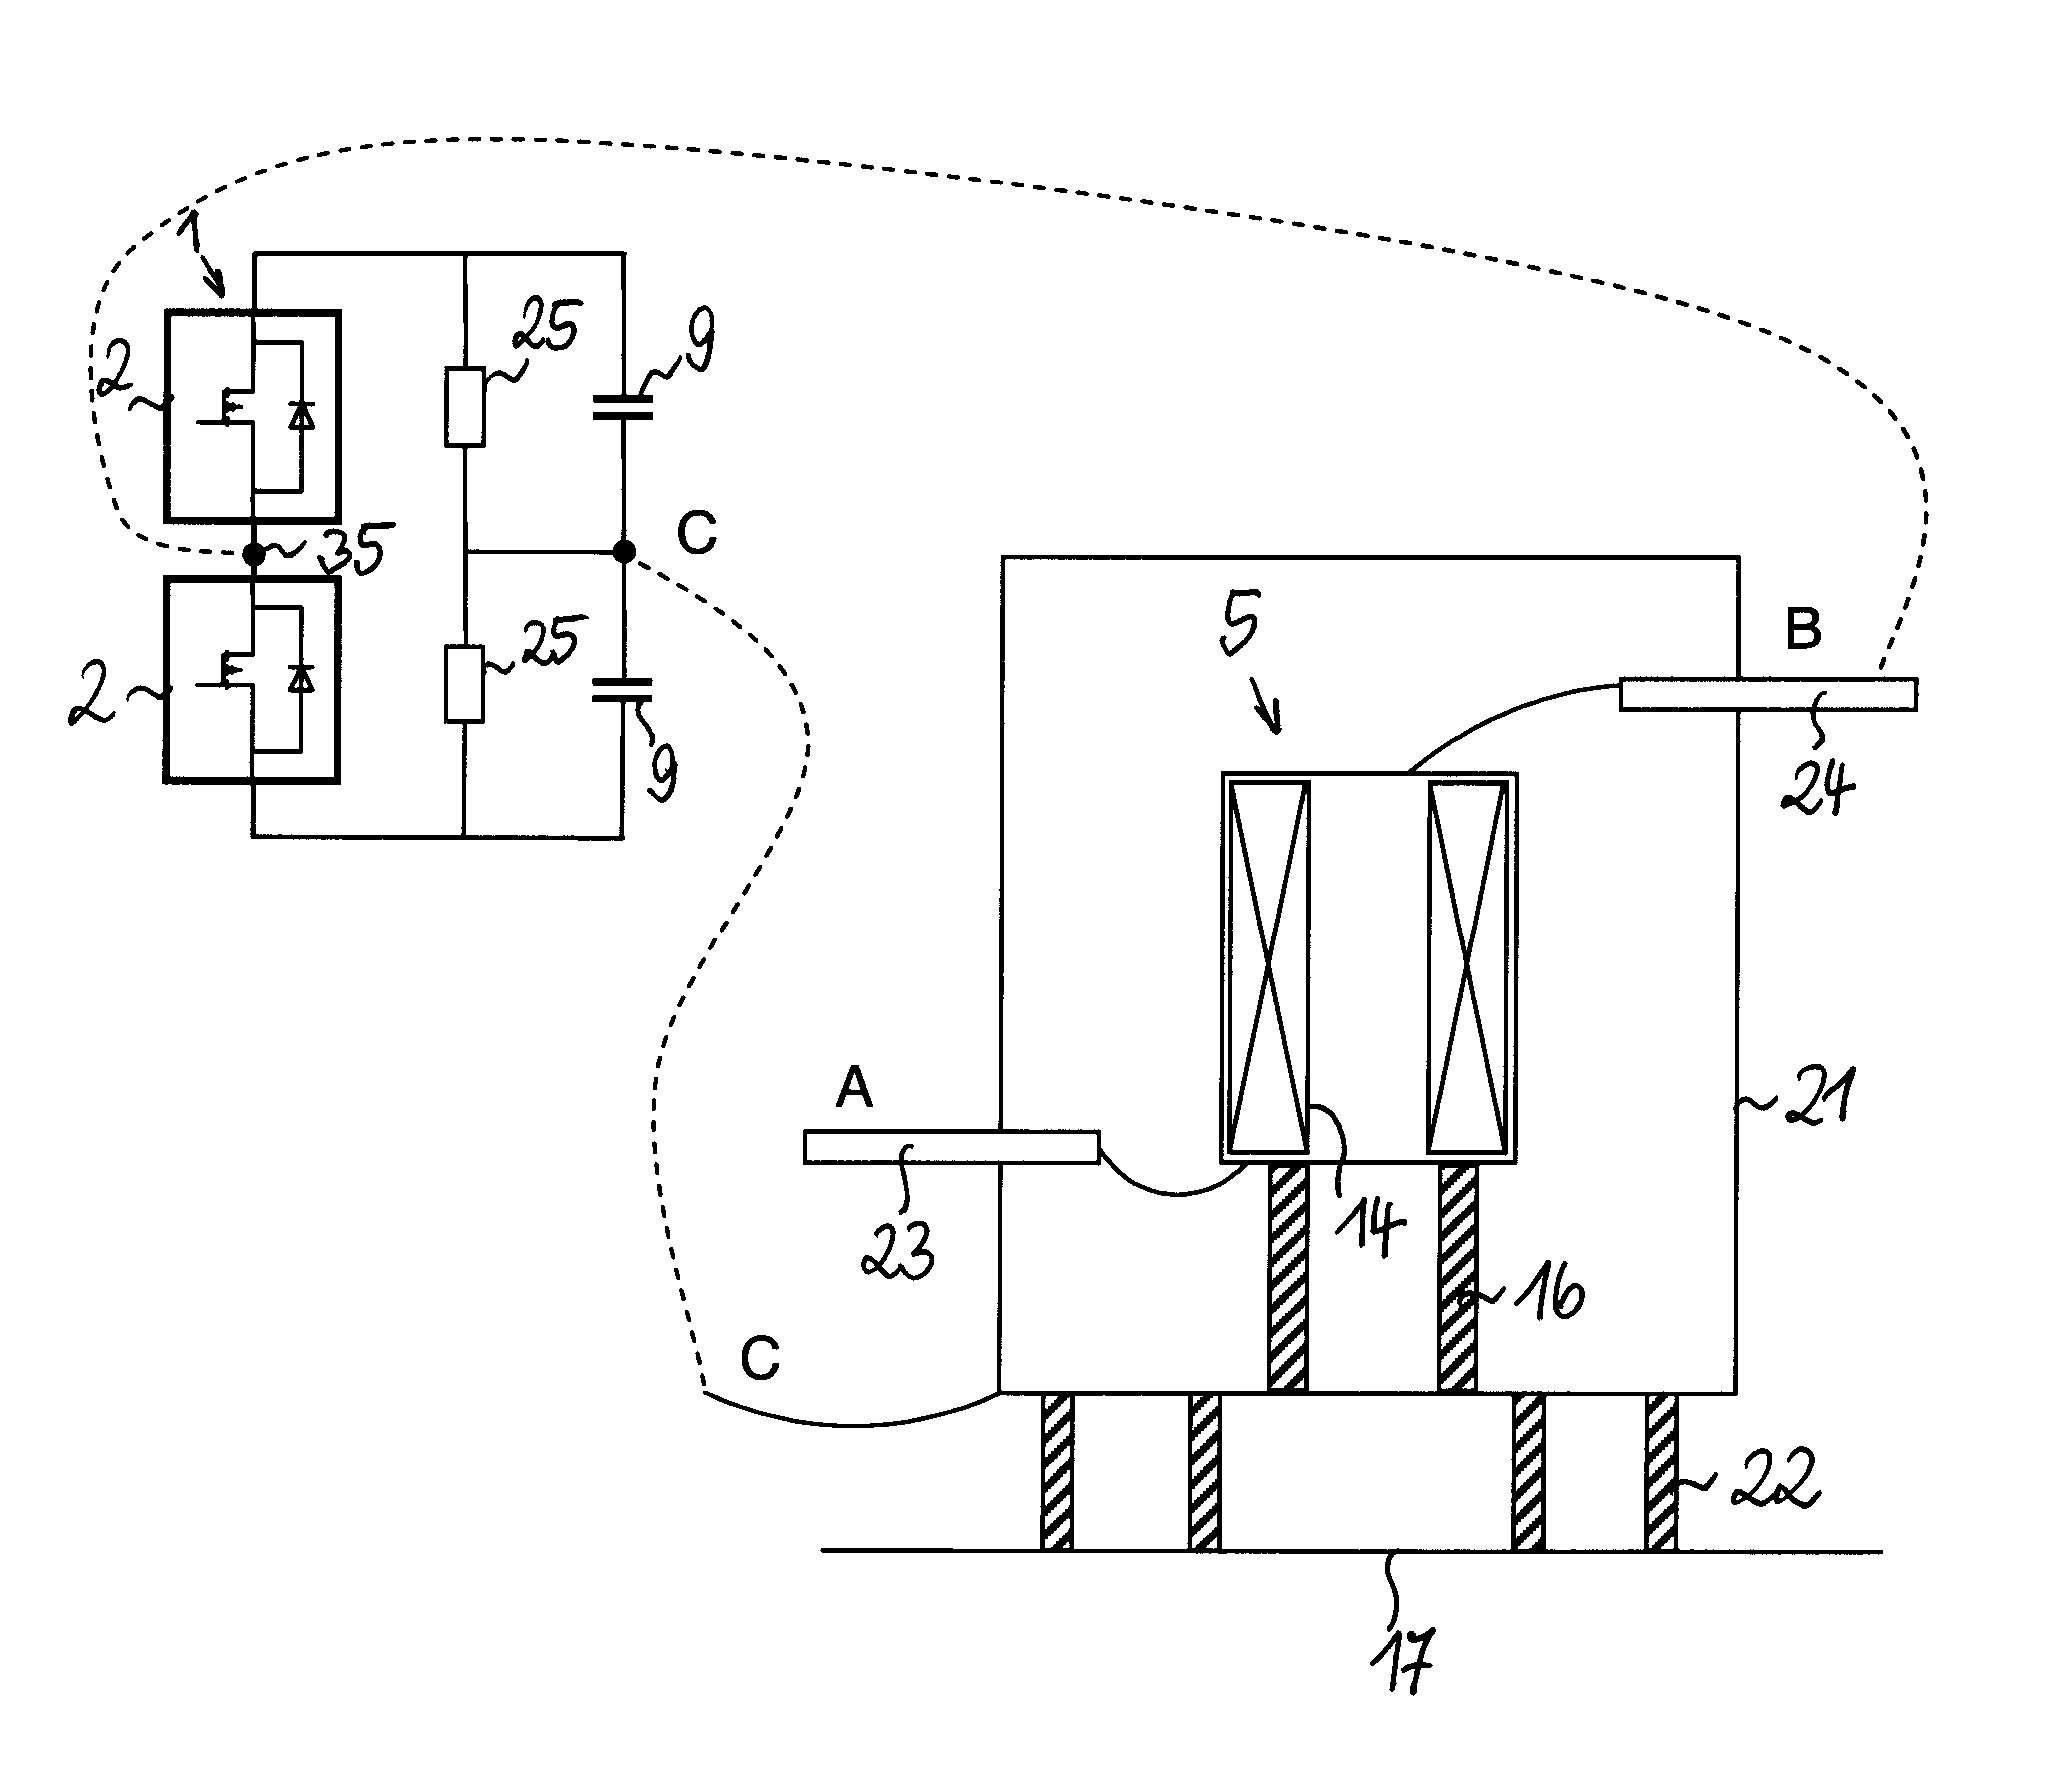 High voltage dry-type reactor for a voltage source converter